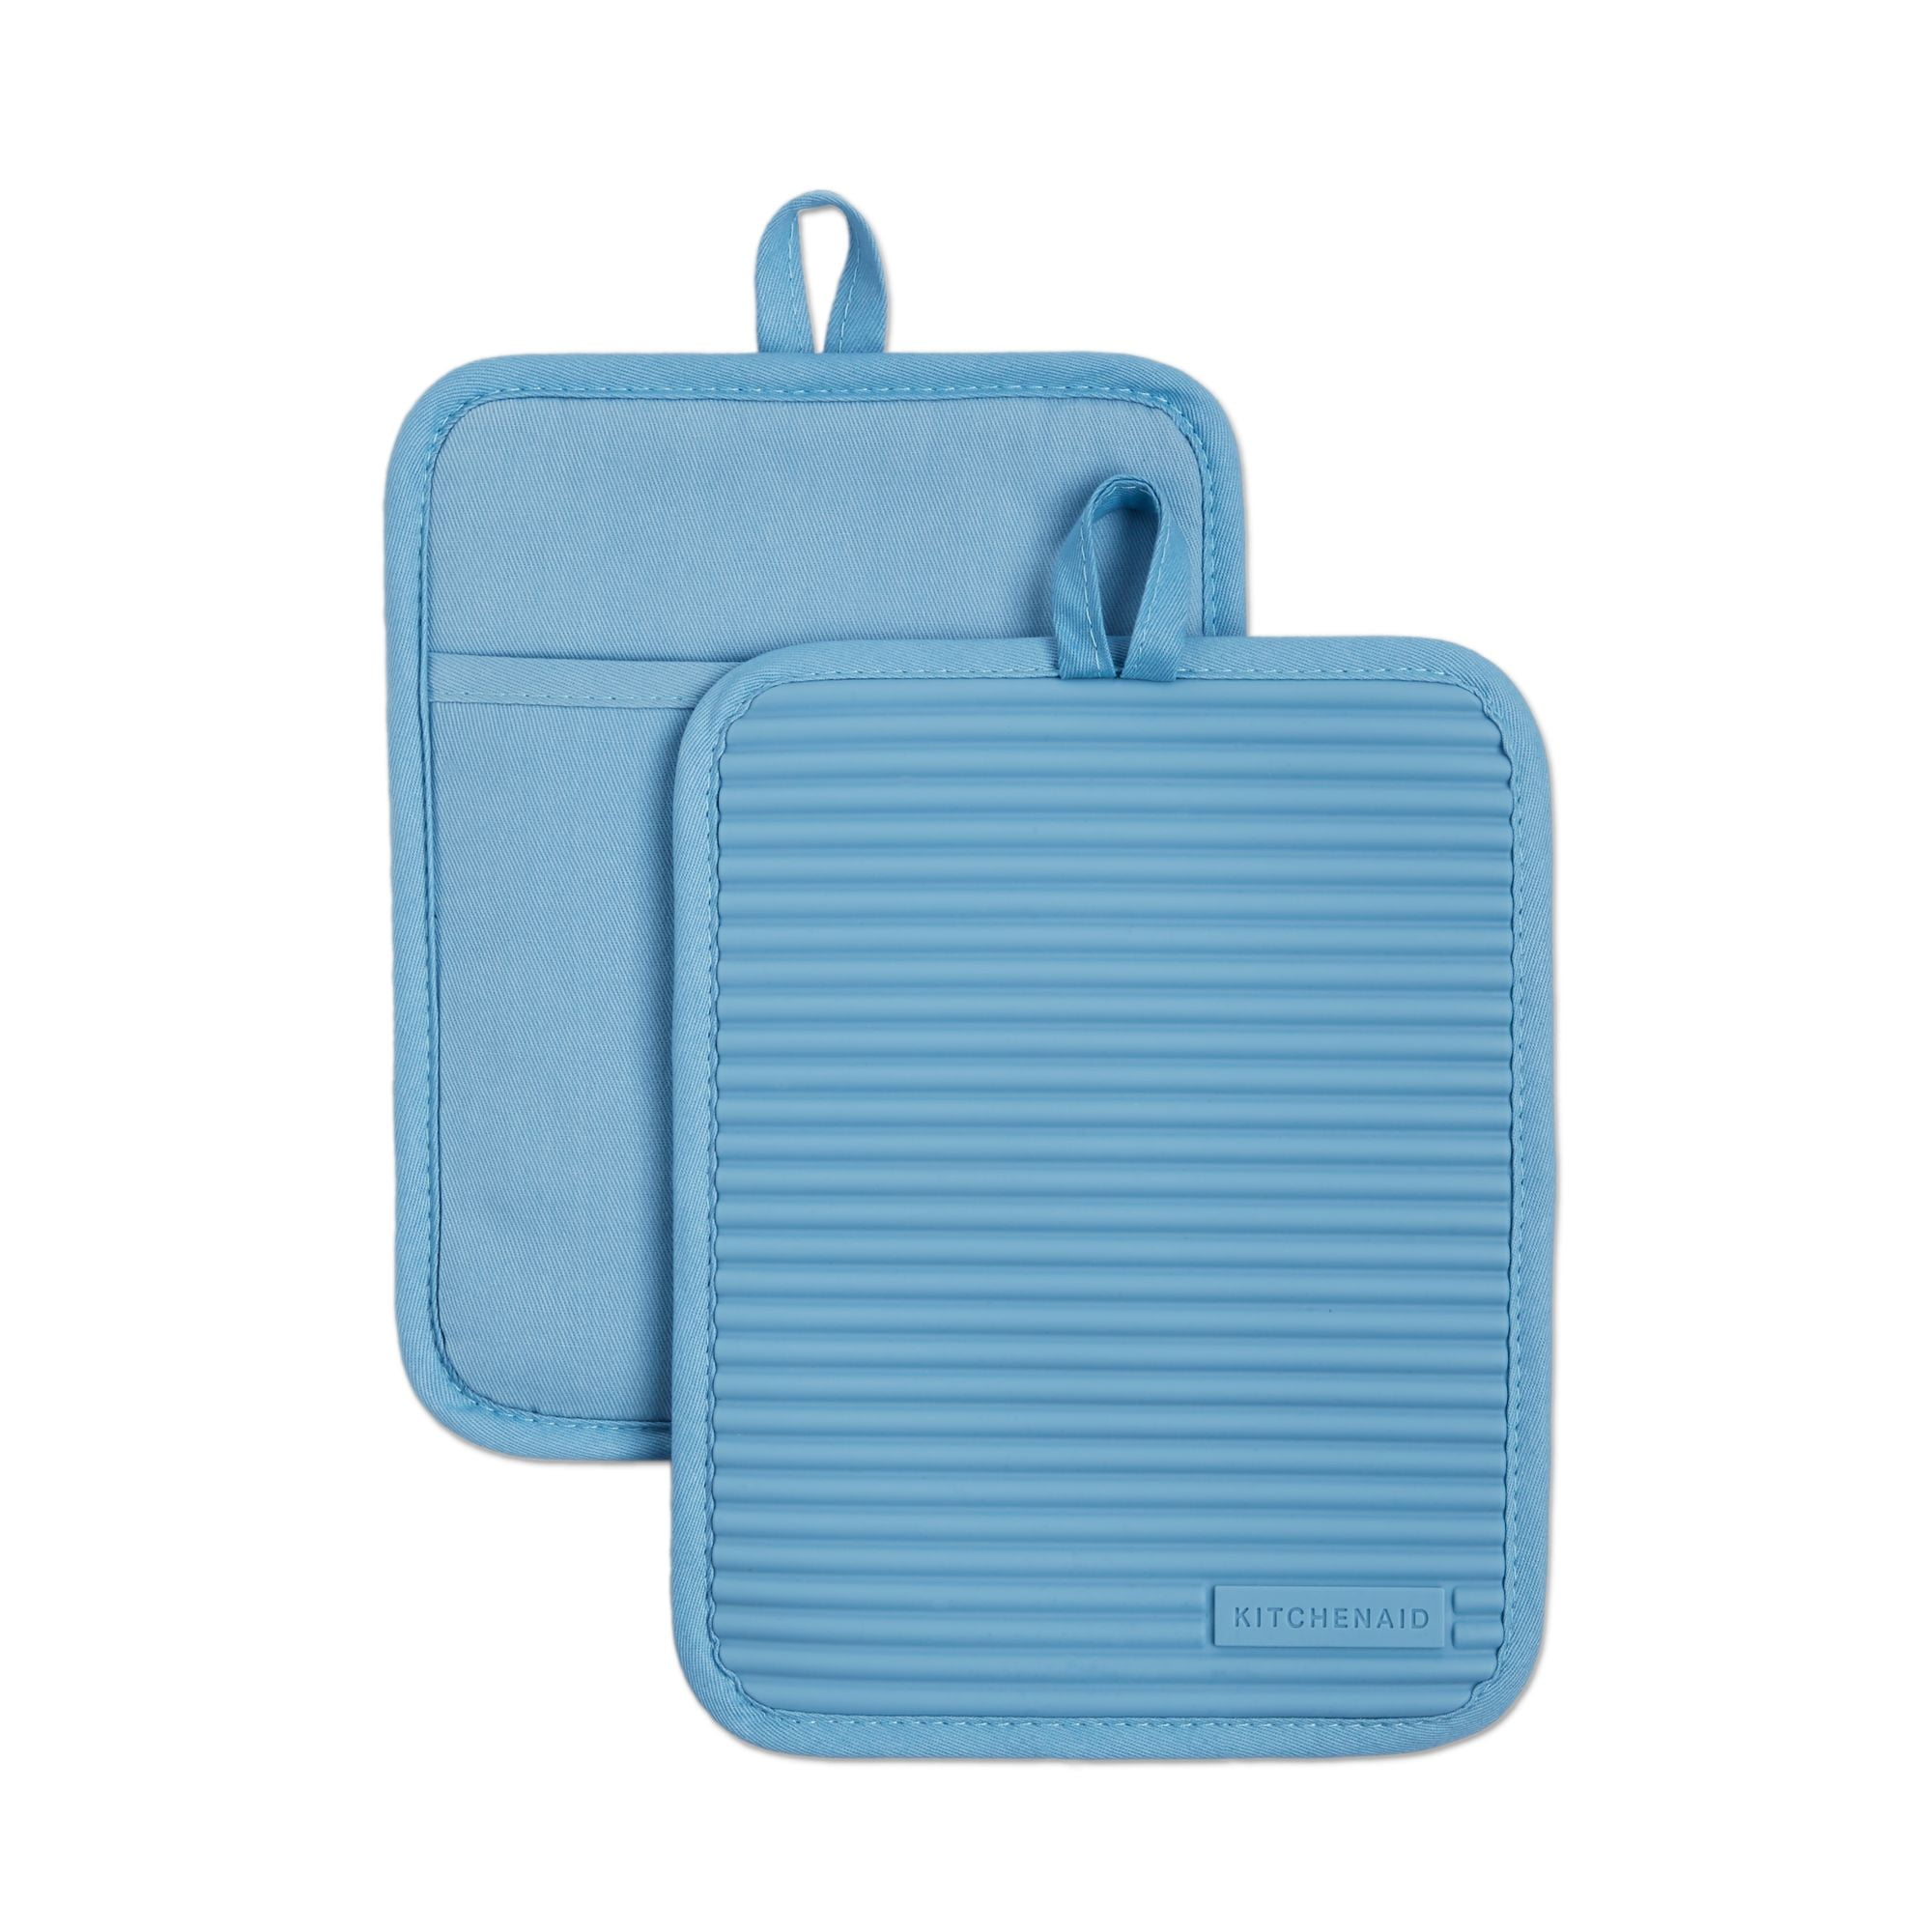 T-Fal Blue Medallion Cotton Silicone Pot Holder (2-Pack)